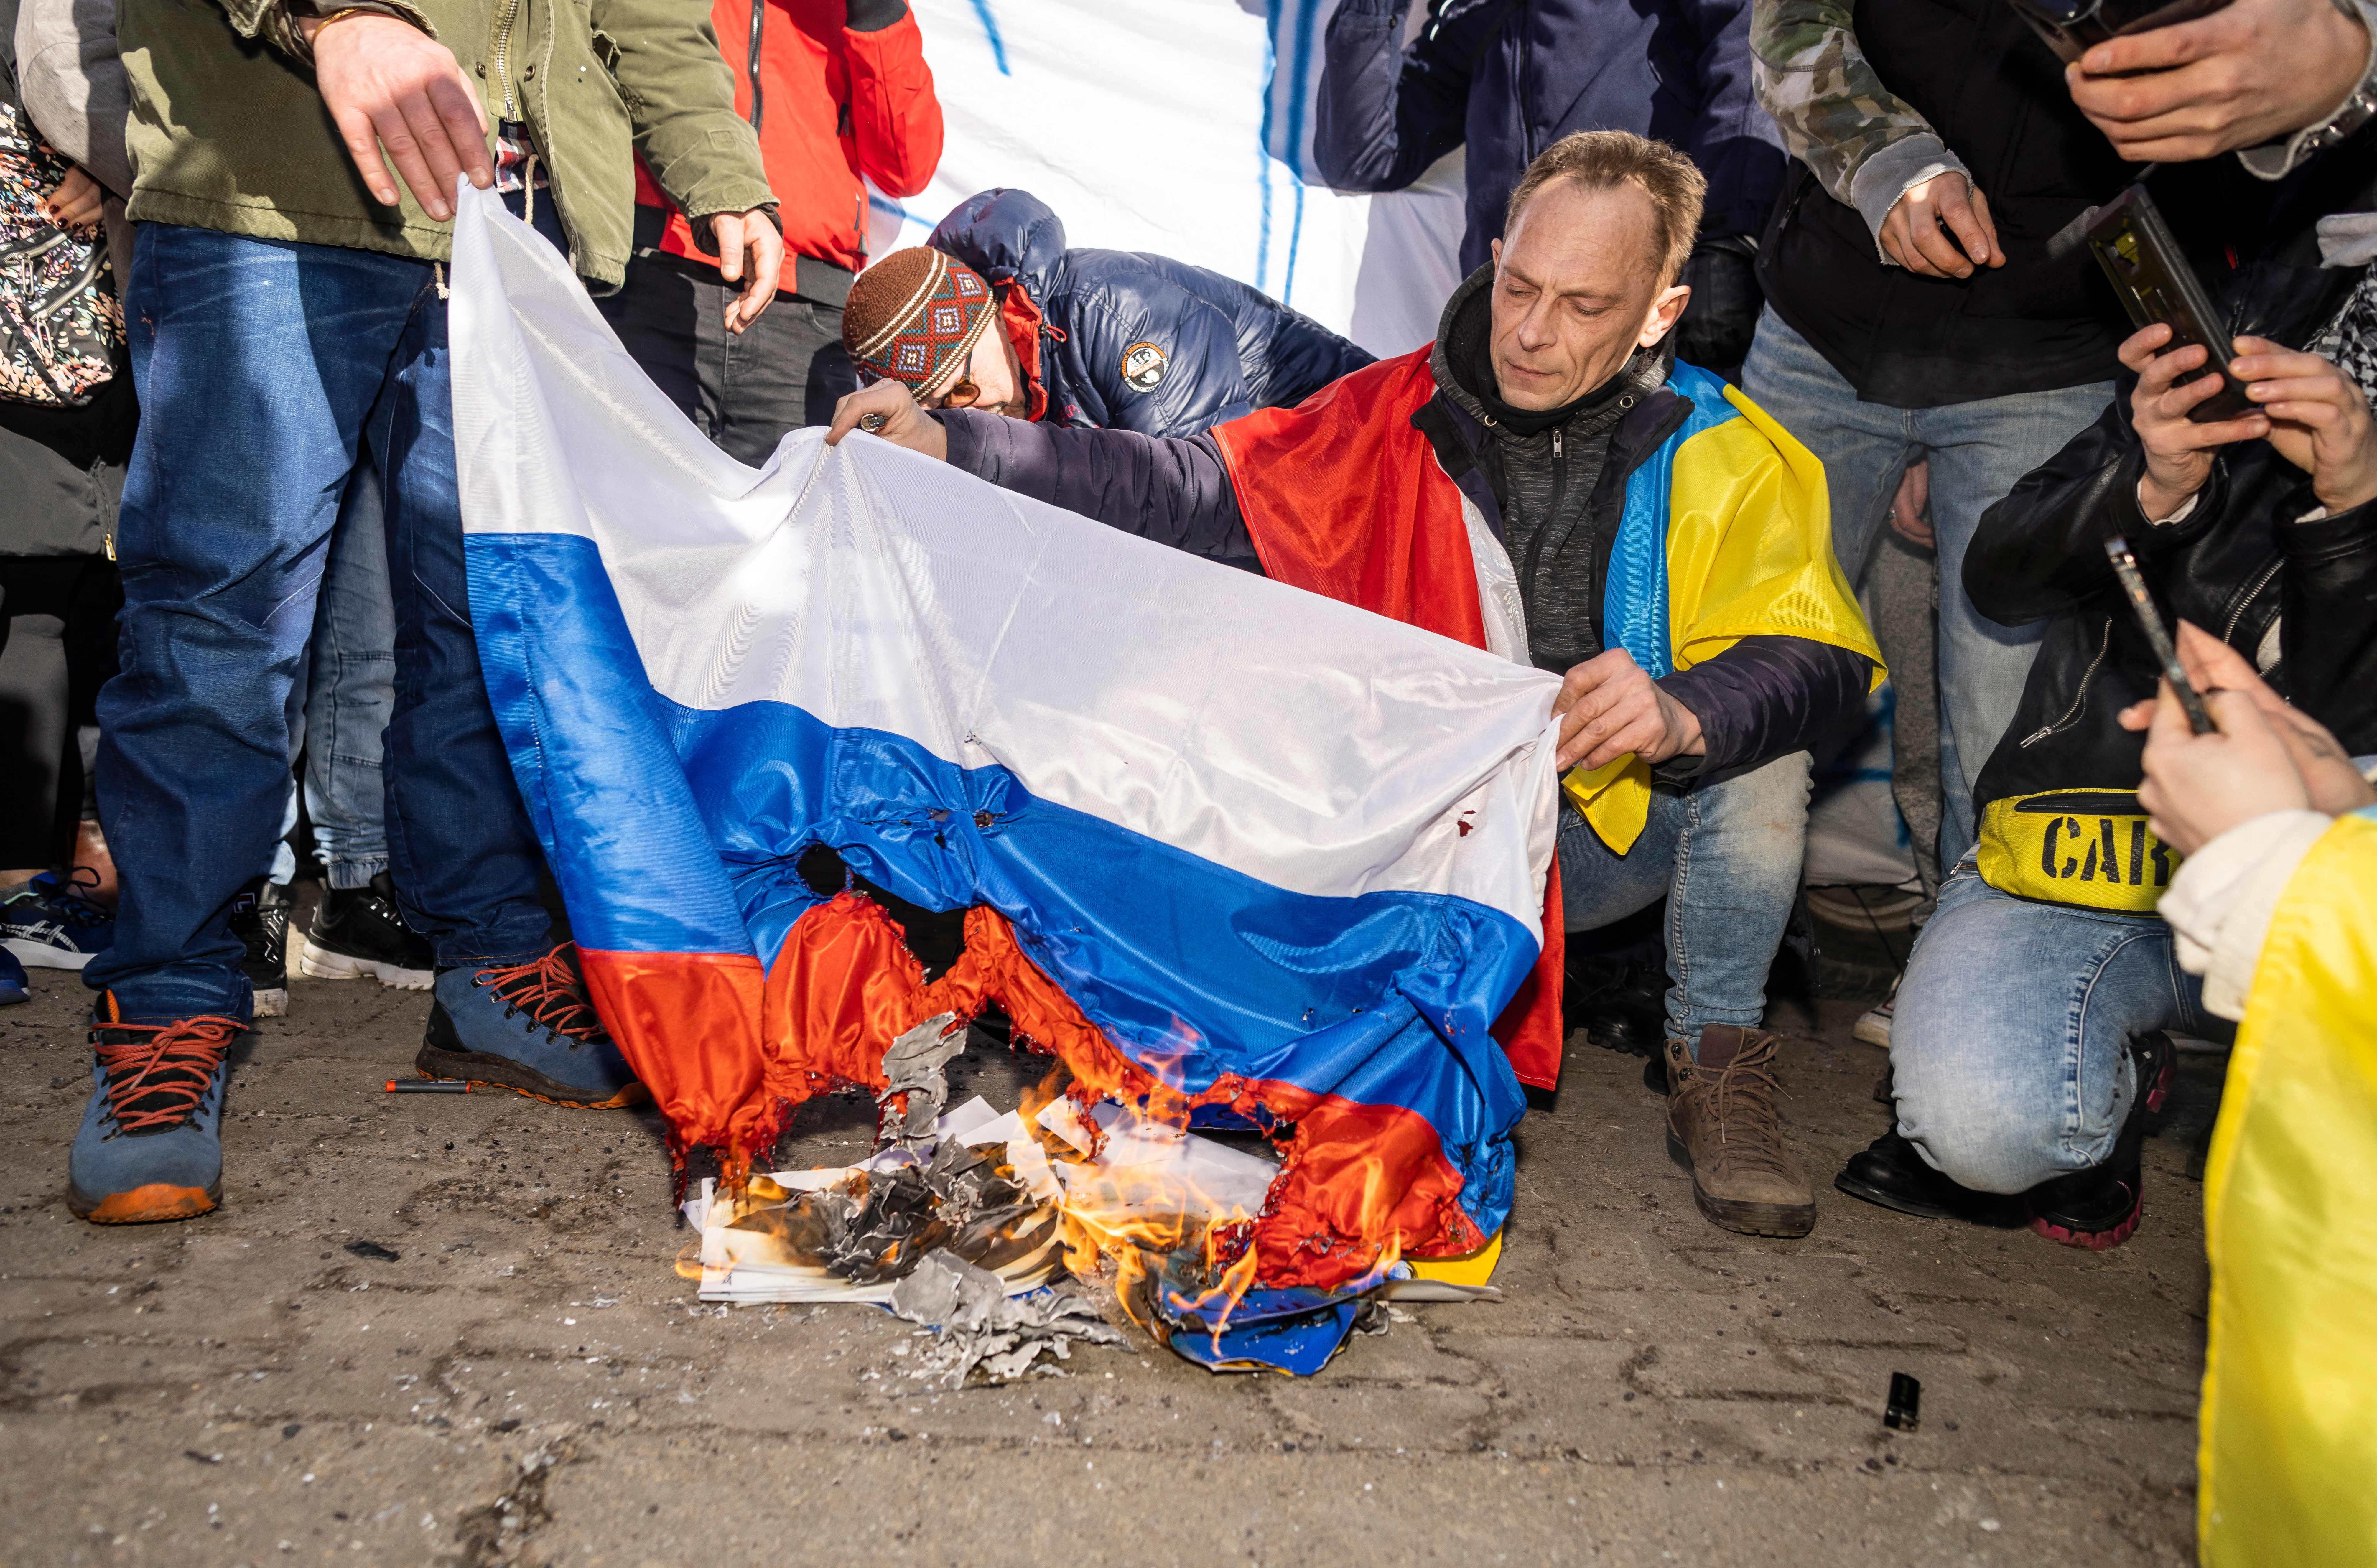 Protesters burning Russia's flag in front of the Russian embassy in Warsaw on Feb. 24.